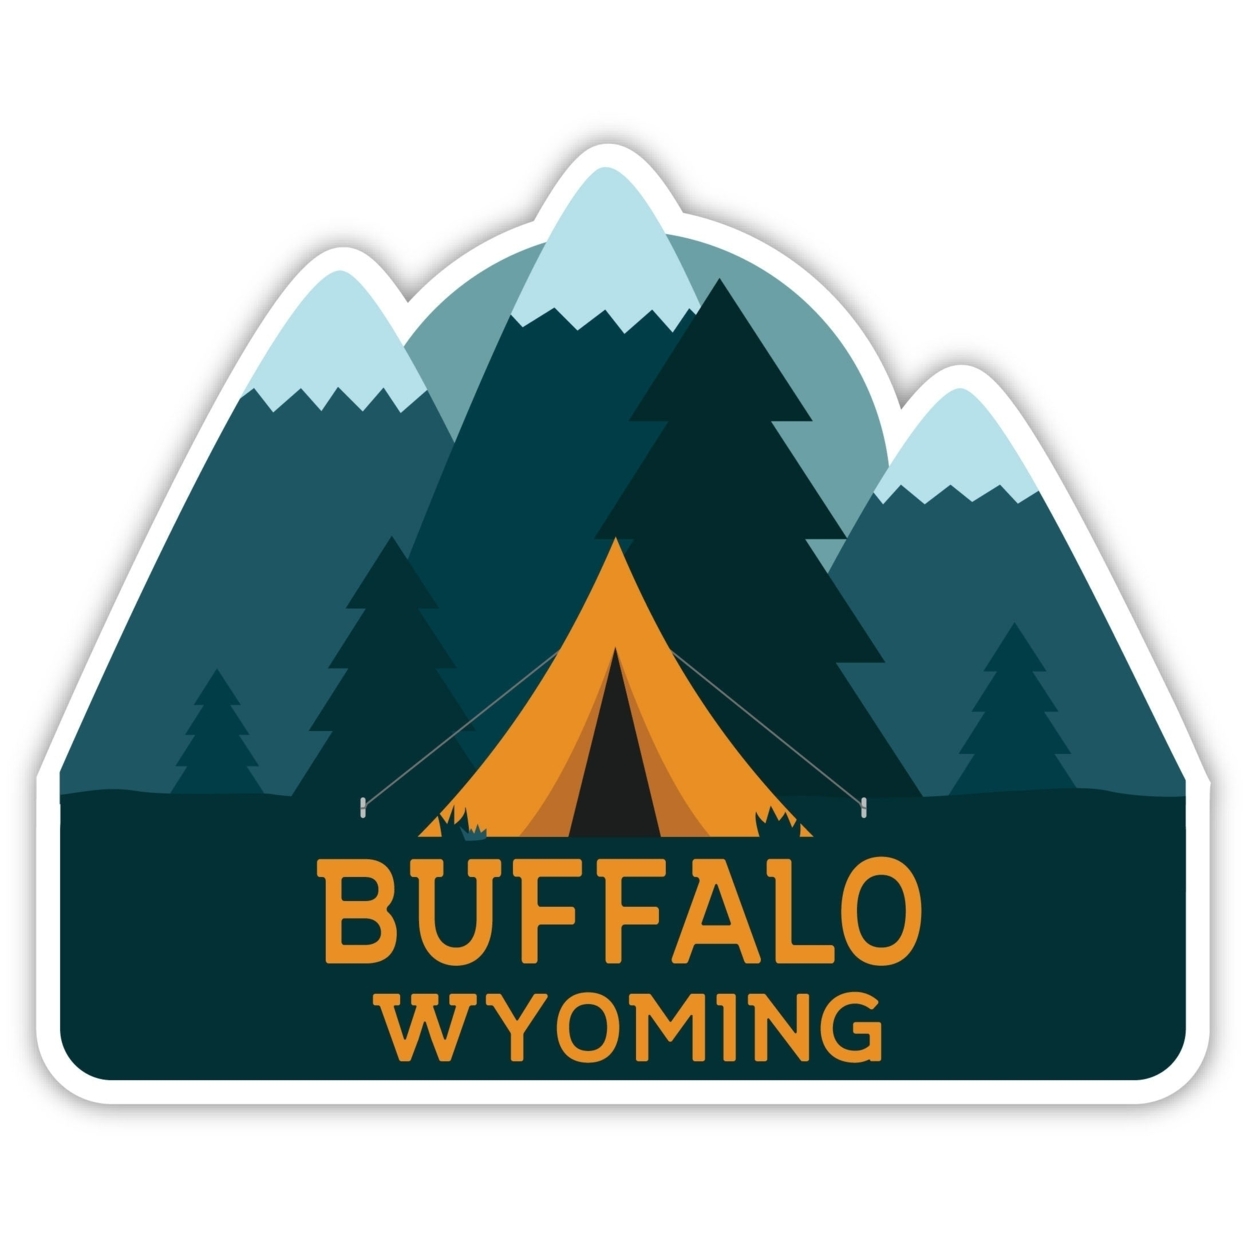 Buffalo Wyoming Souvenir Decorative Stickers (Choose Theme And Size) - Single Unit, 2-Inch, Camp Life